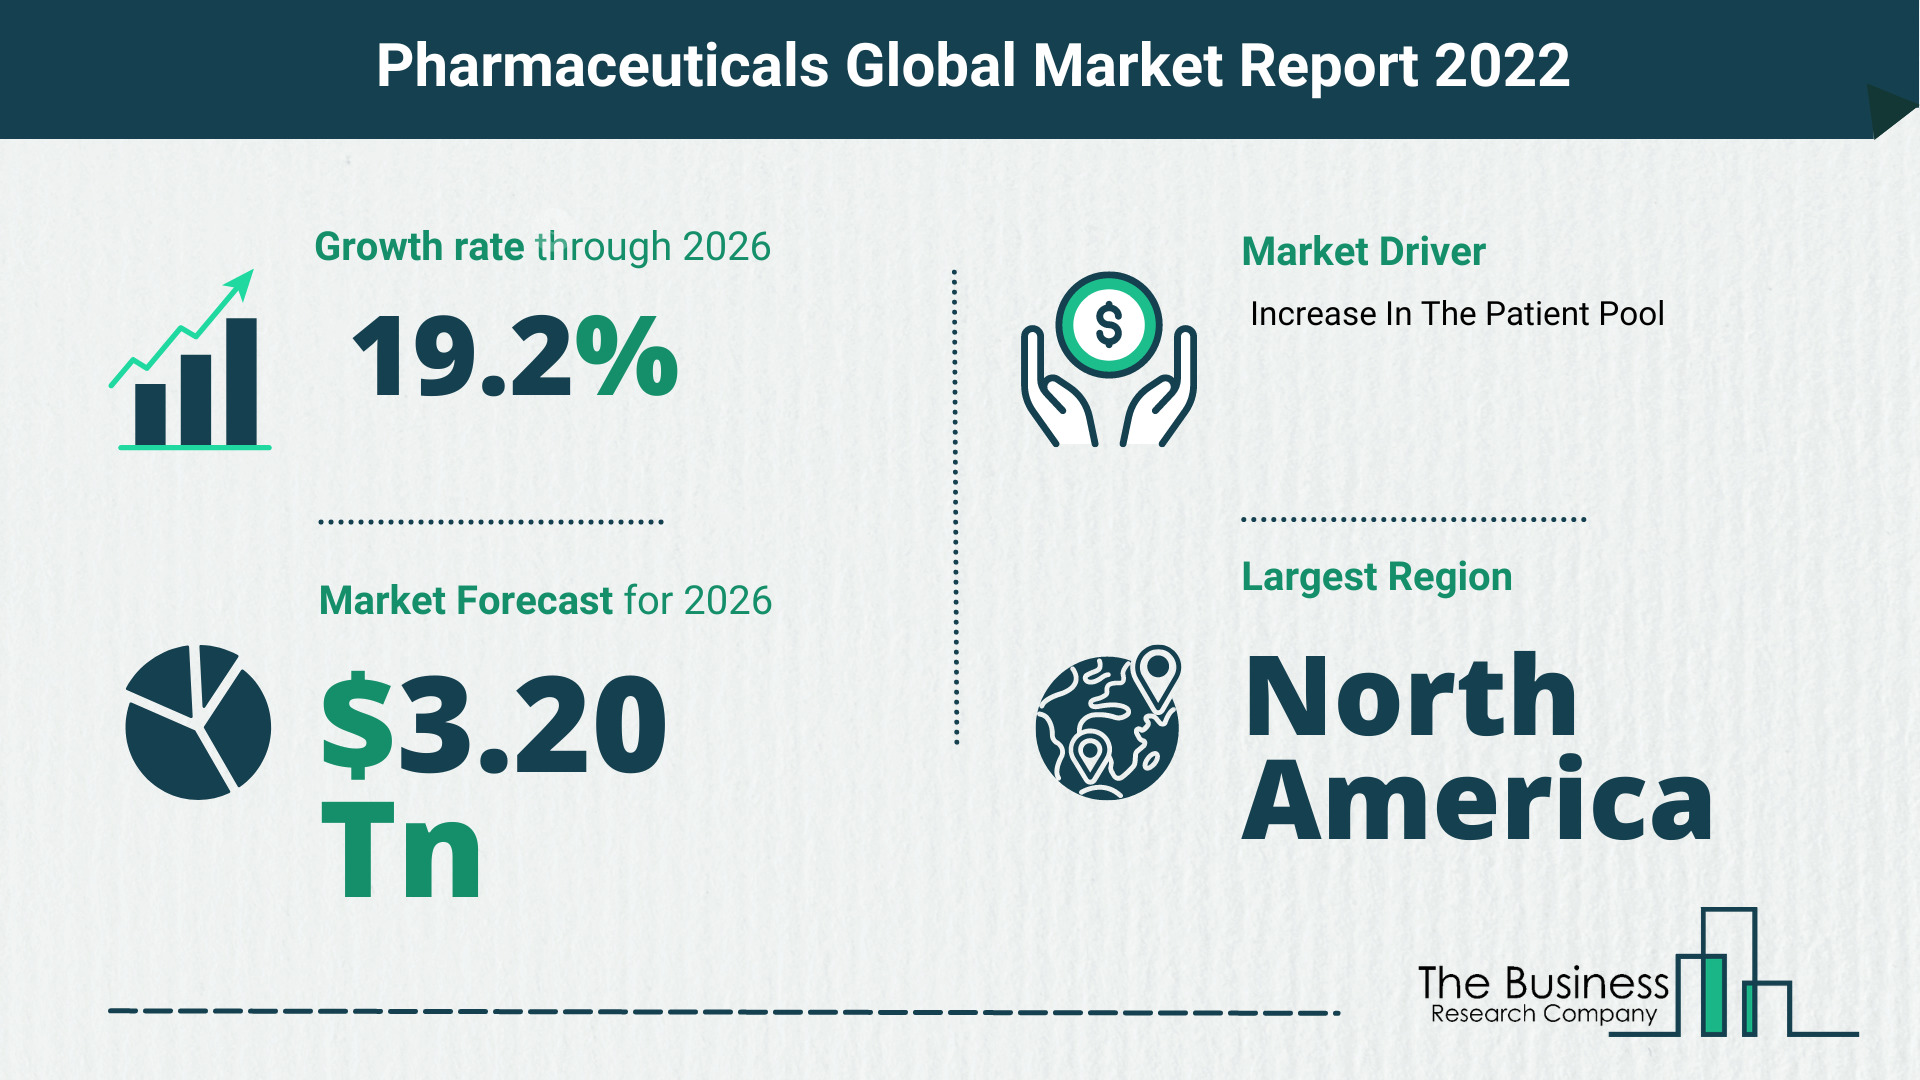 Latest Pharmaceuticals Market Growth Study 2022-2026 By The Business Research Company